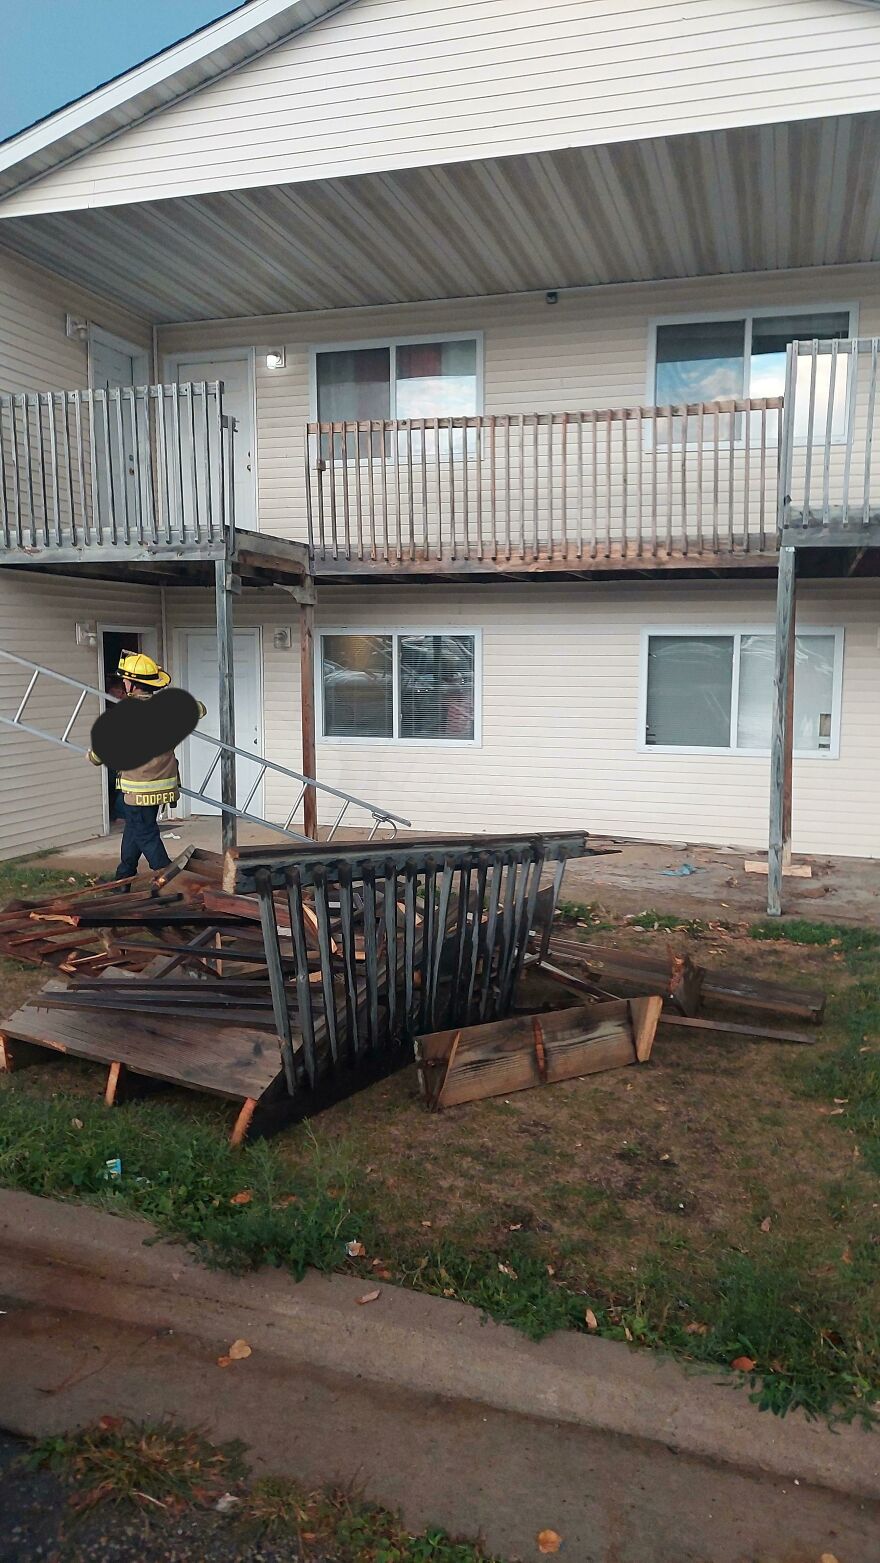 Wednesday, The Stairs To Get To My And Three Other Apartments Collapsed